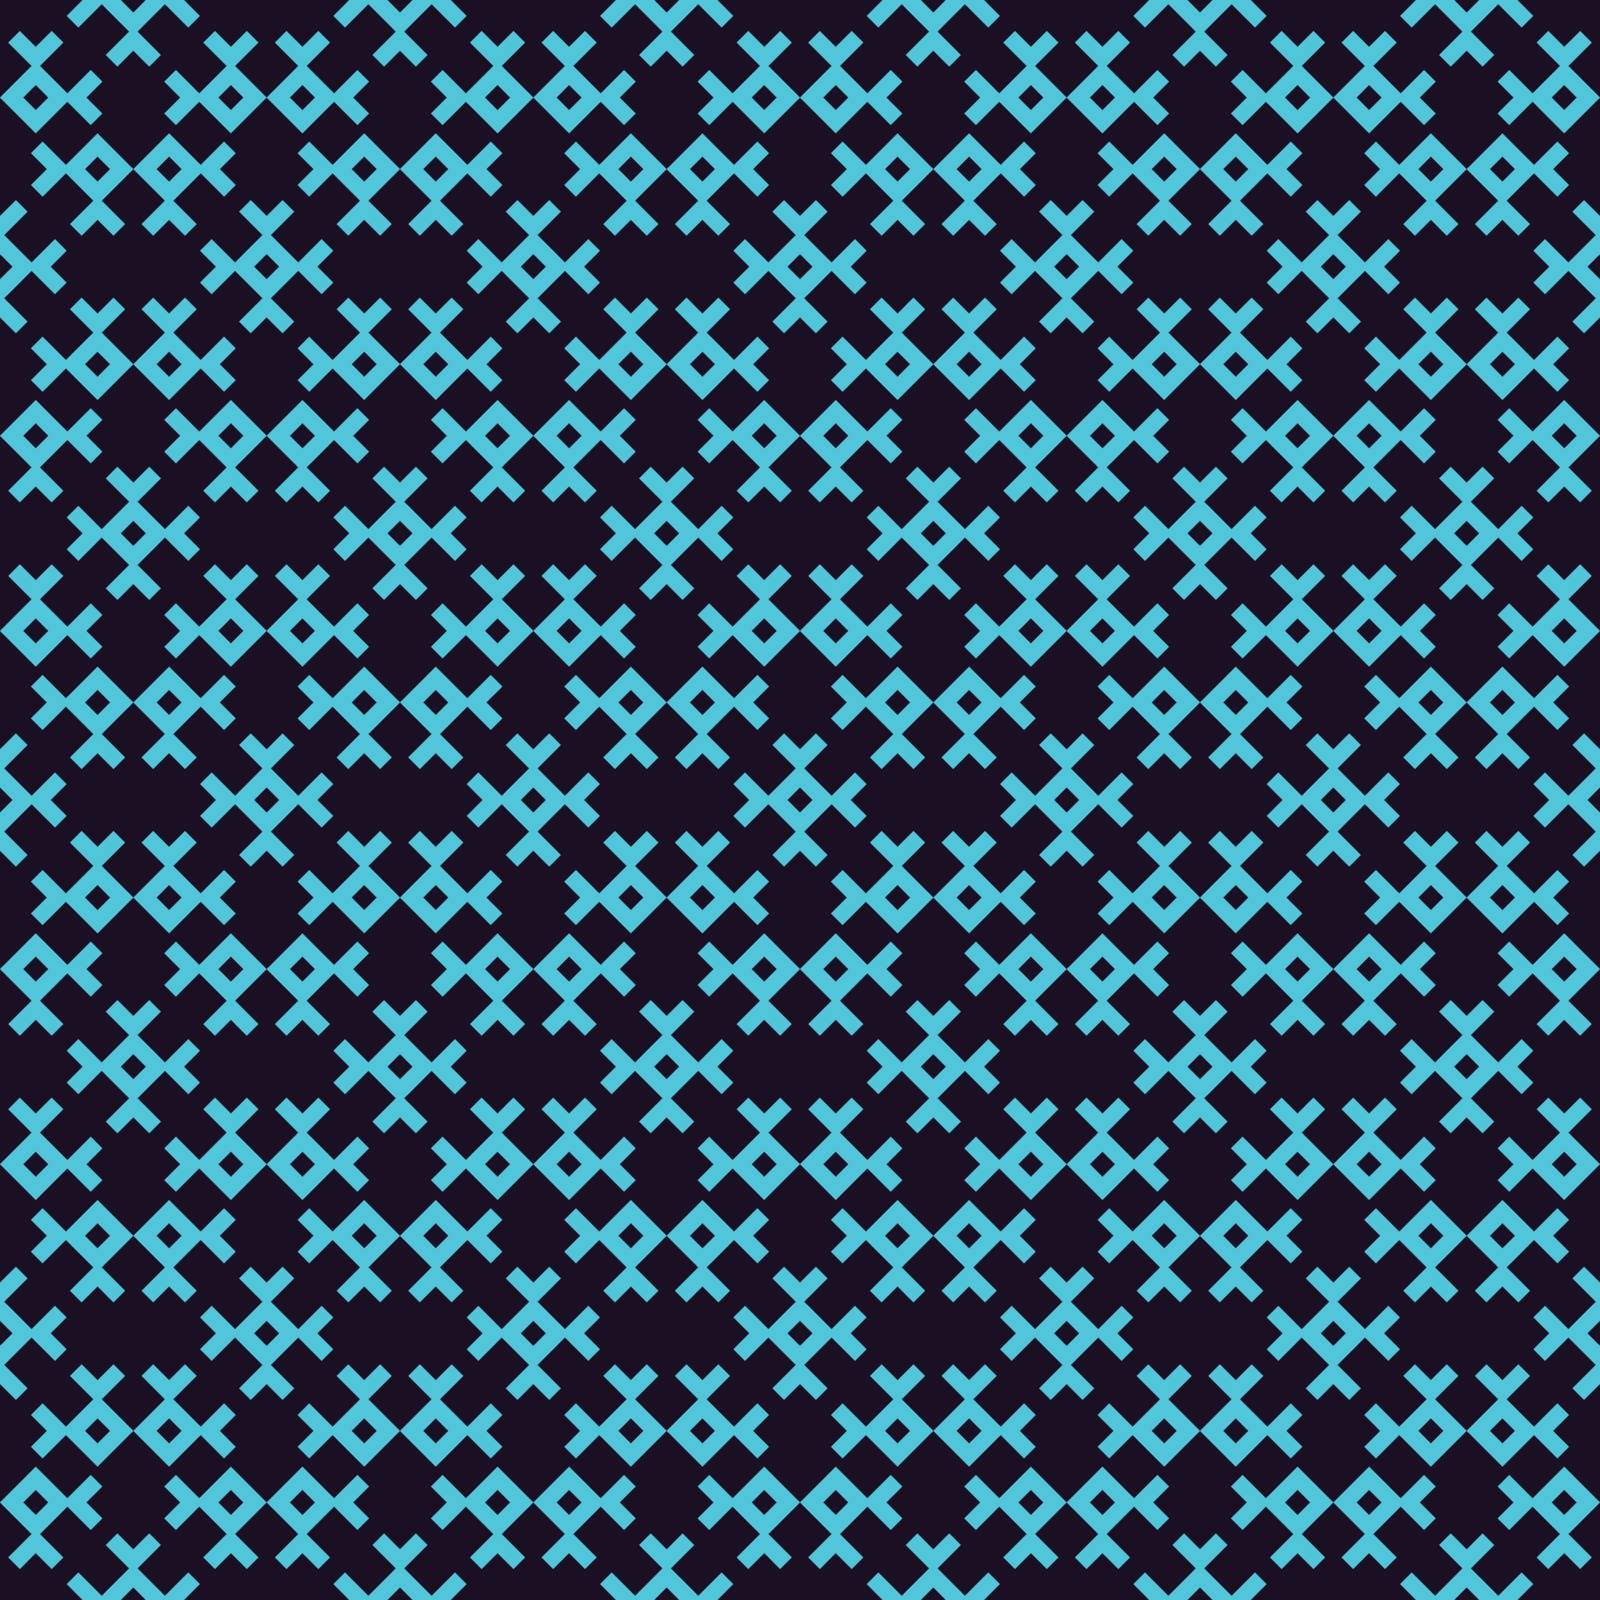 Vector seamless pattern. Modern stylish linear texture. Repeating geometric tiles with line elements.